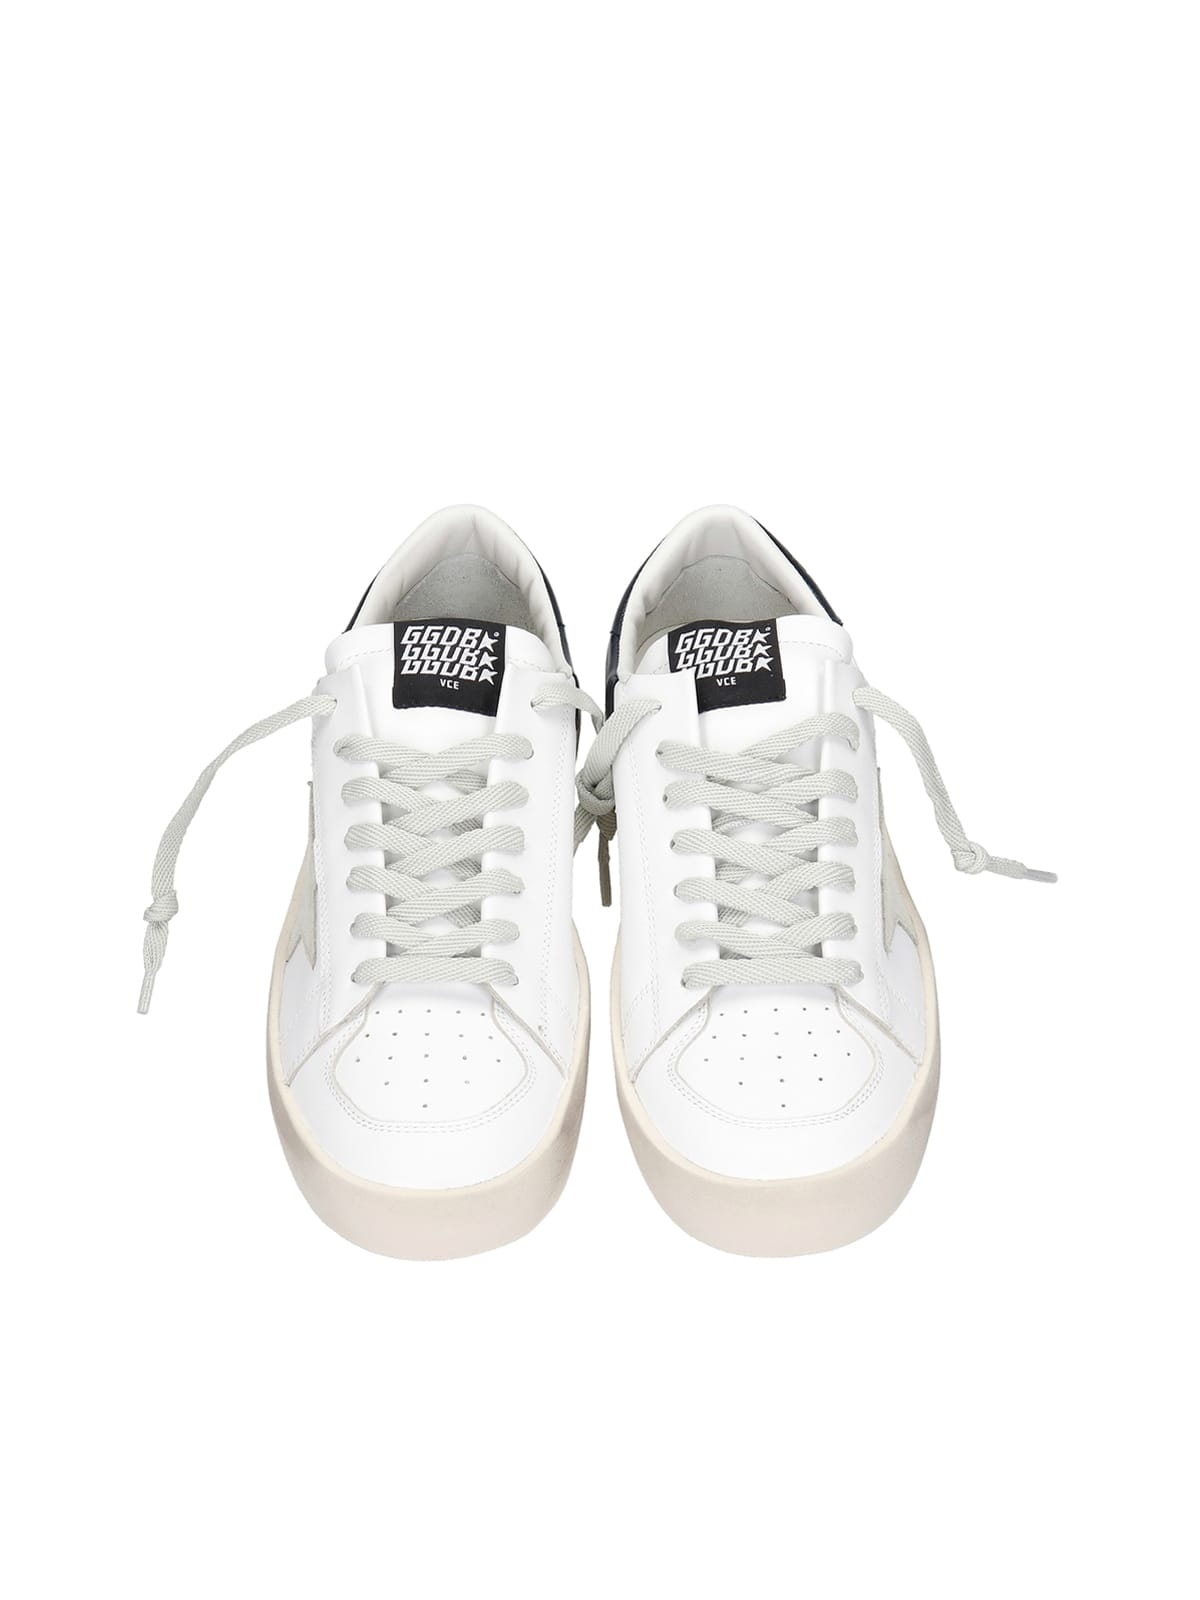 Shop Golden Goose Stardan Leather Upper Suede Star Shiny Leather Heel In White Ice Blue